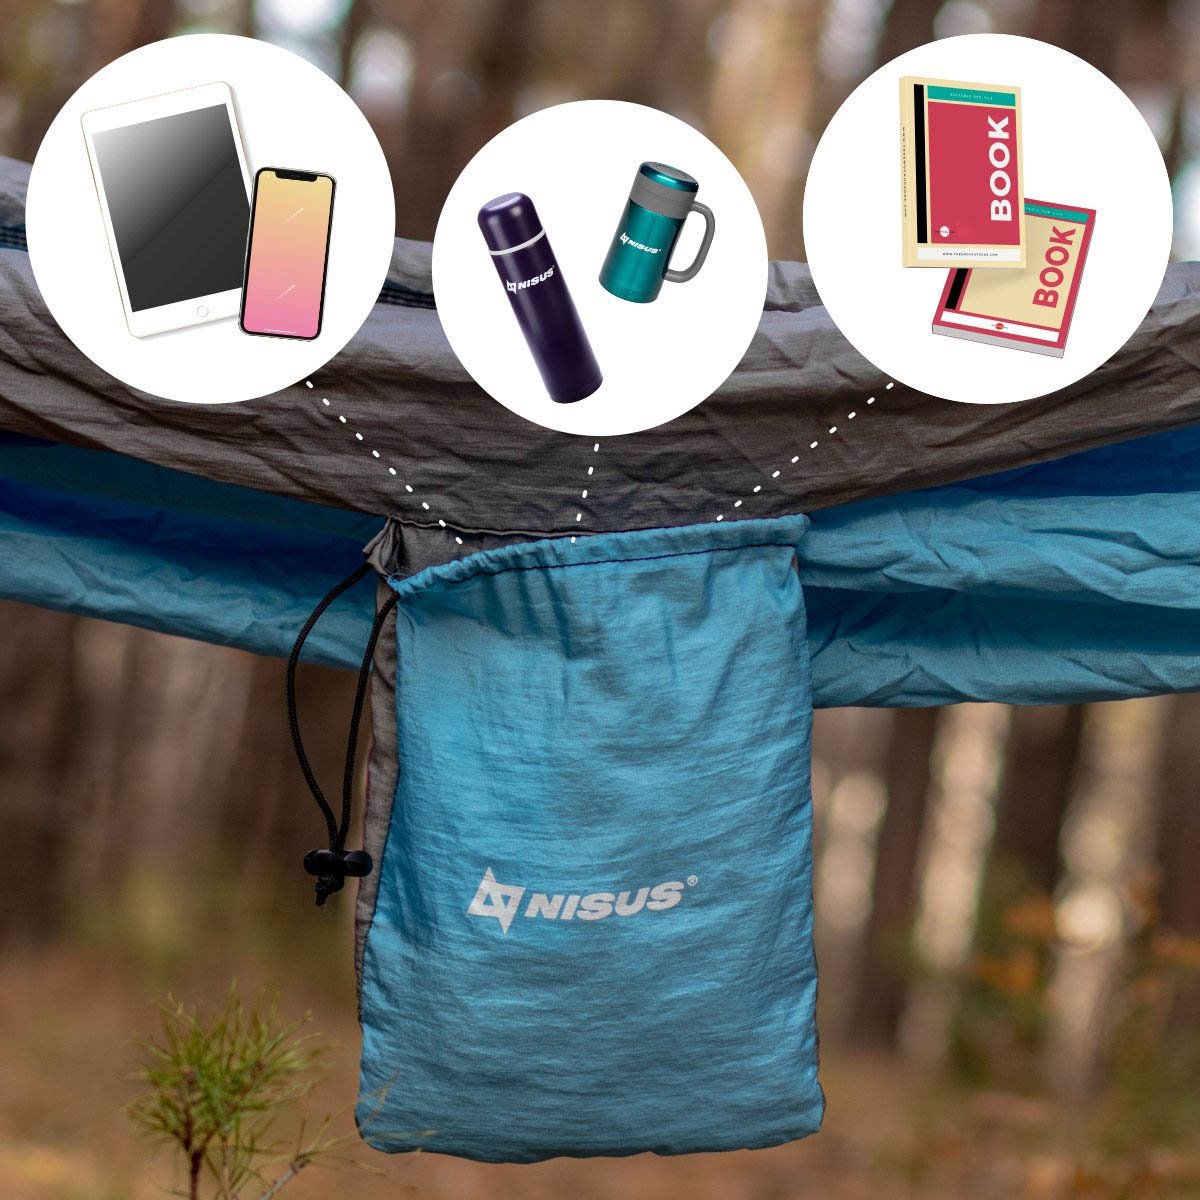 Things which could be carried in a Nisus hammock carry bag - phone, stanless steel bottle, a book.